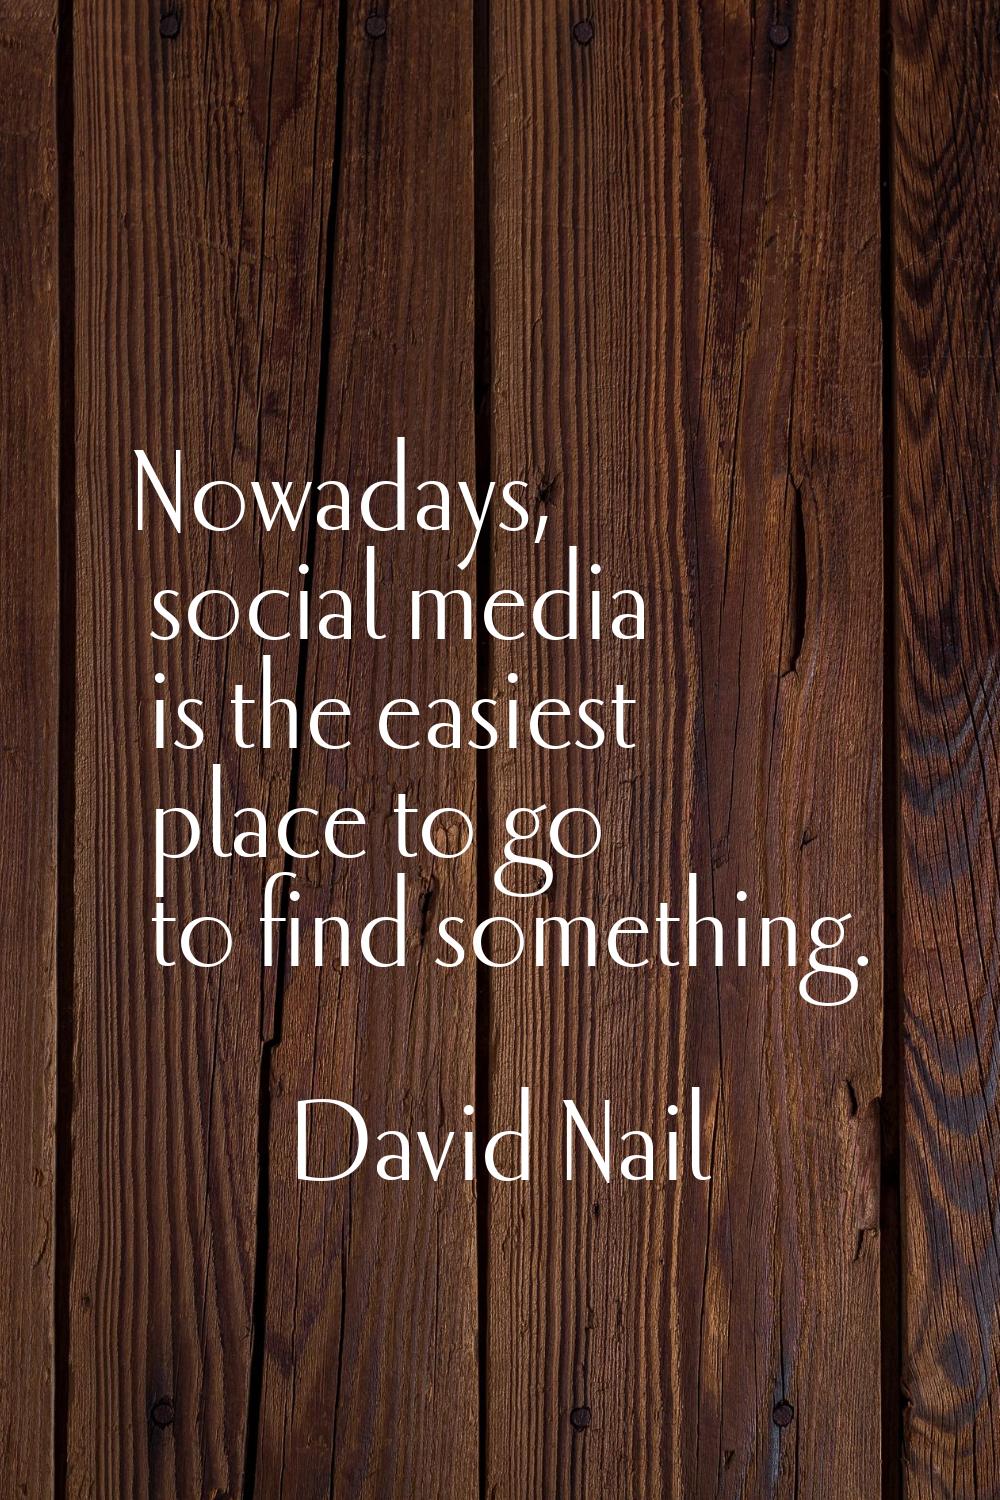 Nowadays, social media is the easiest place to go to find something.